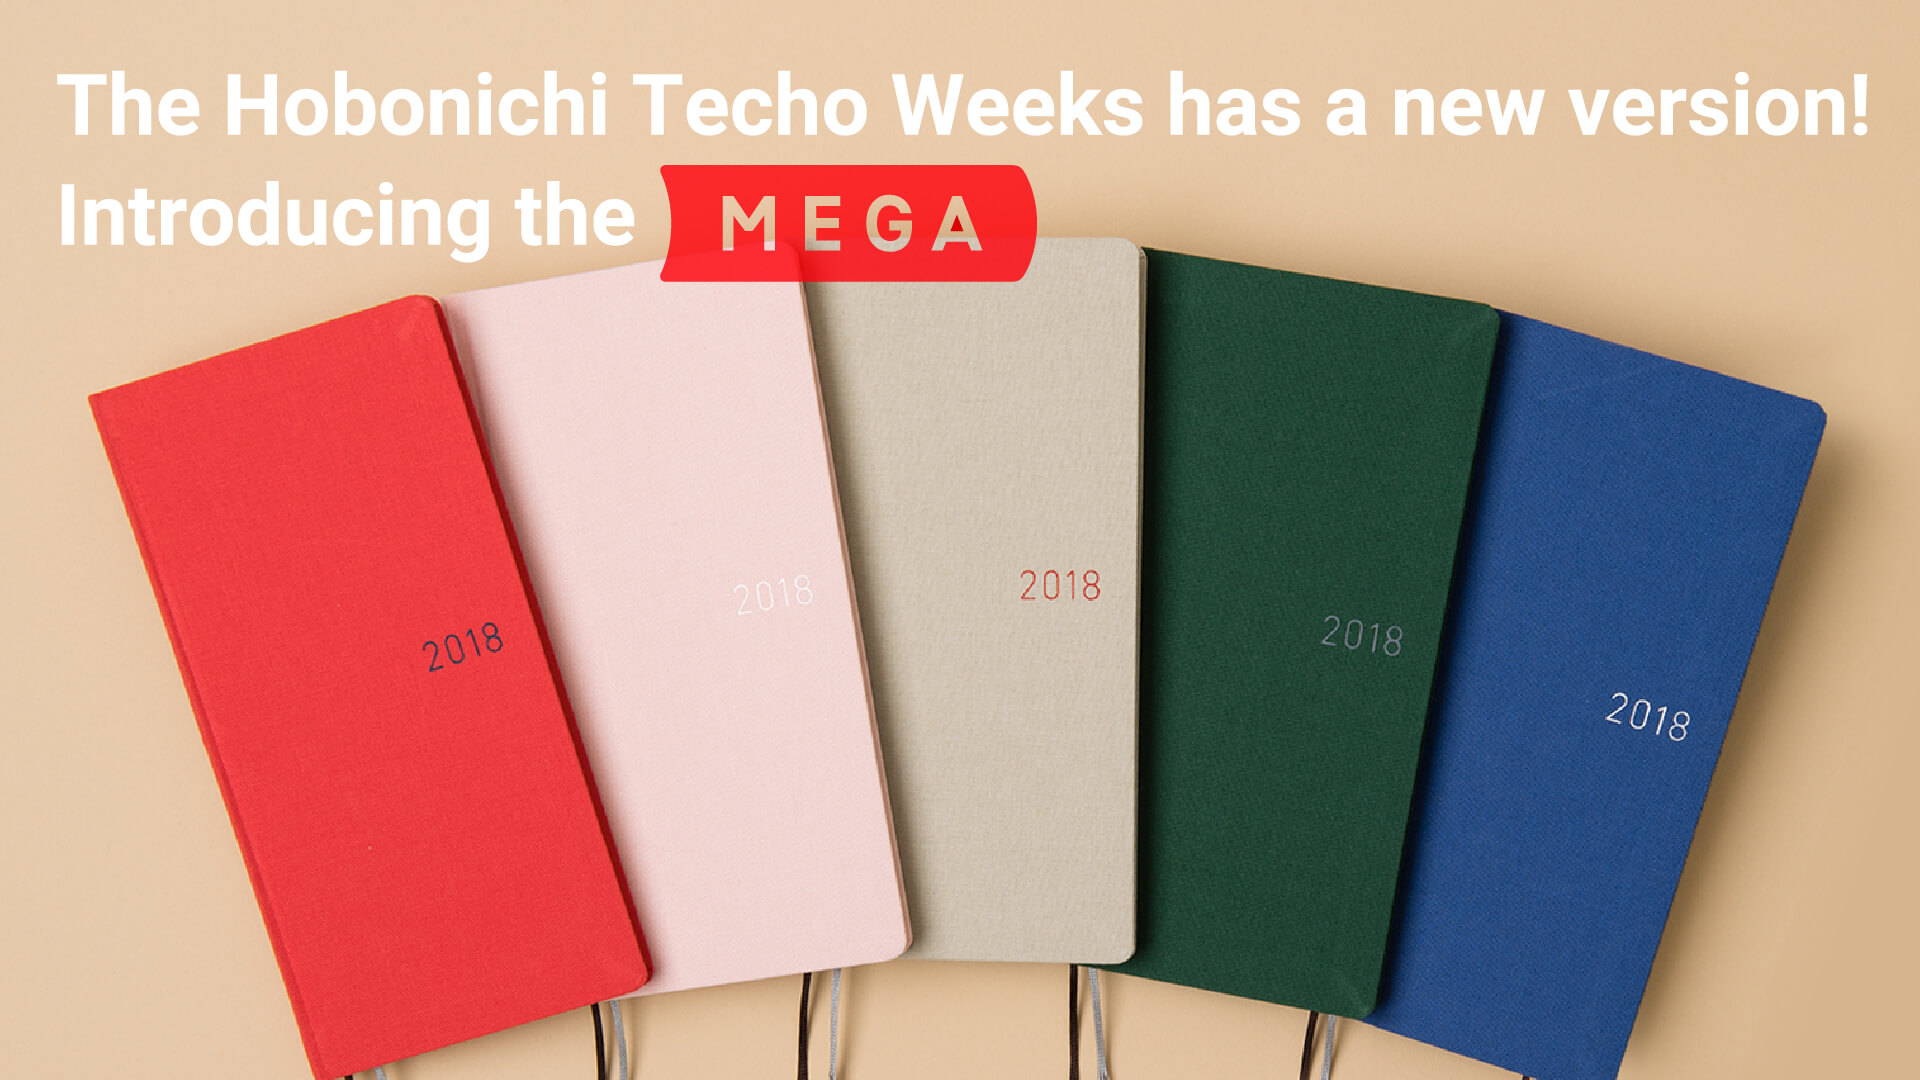 The Hobonichi Techo Weeks has a new version!